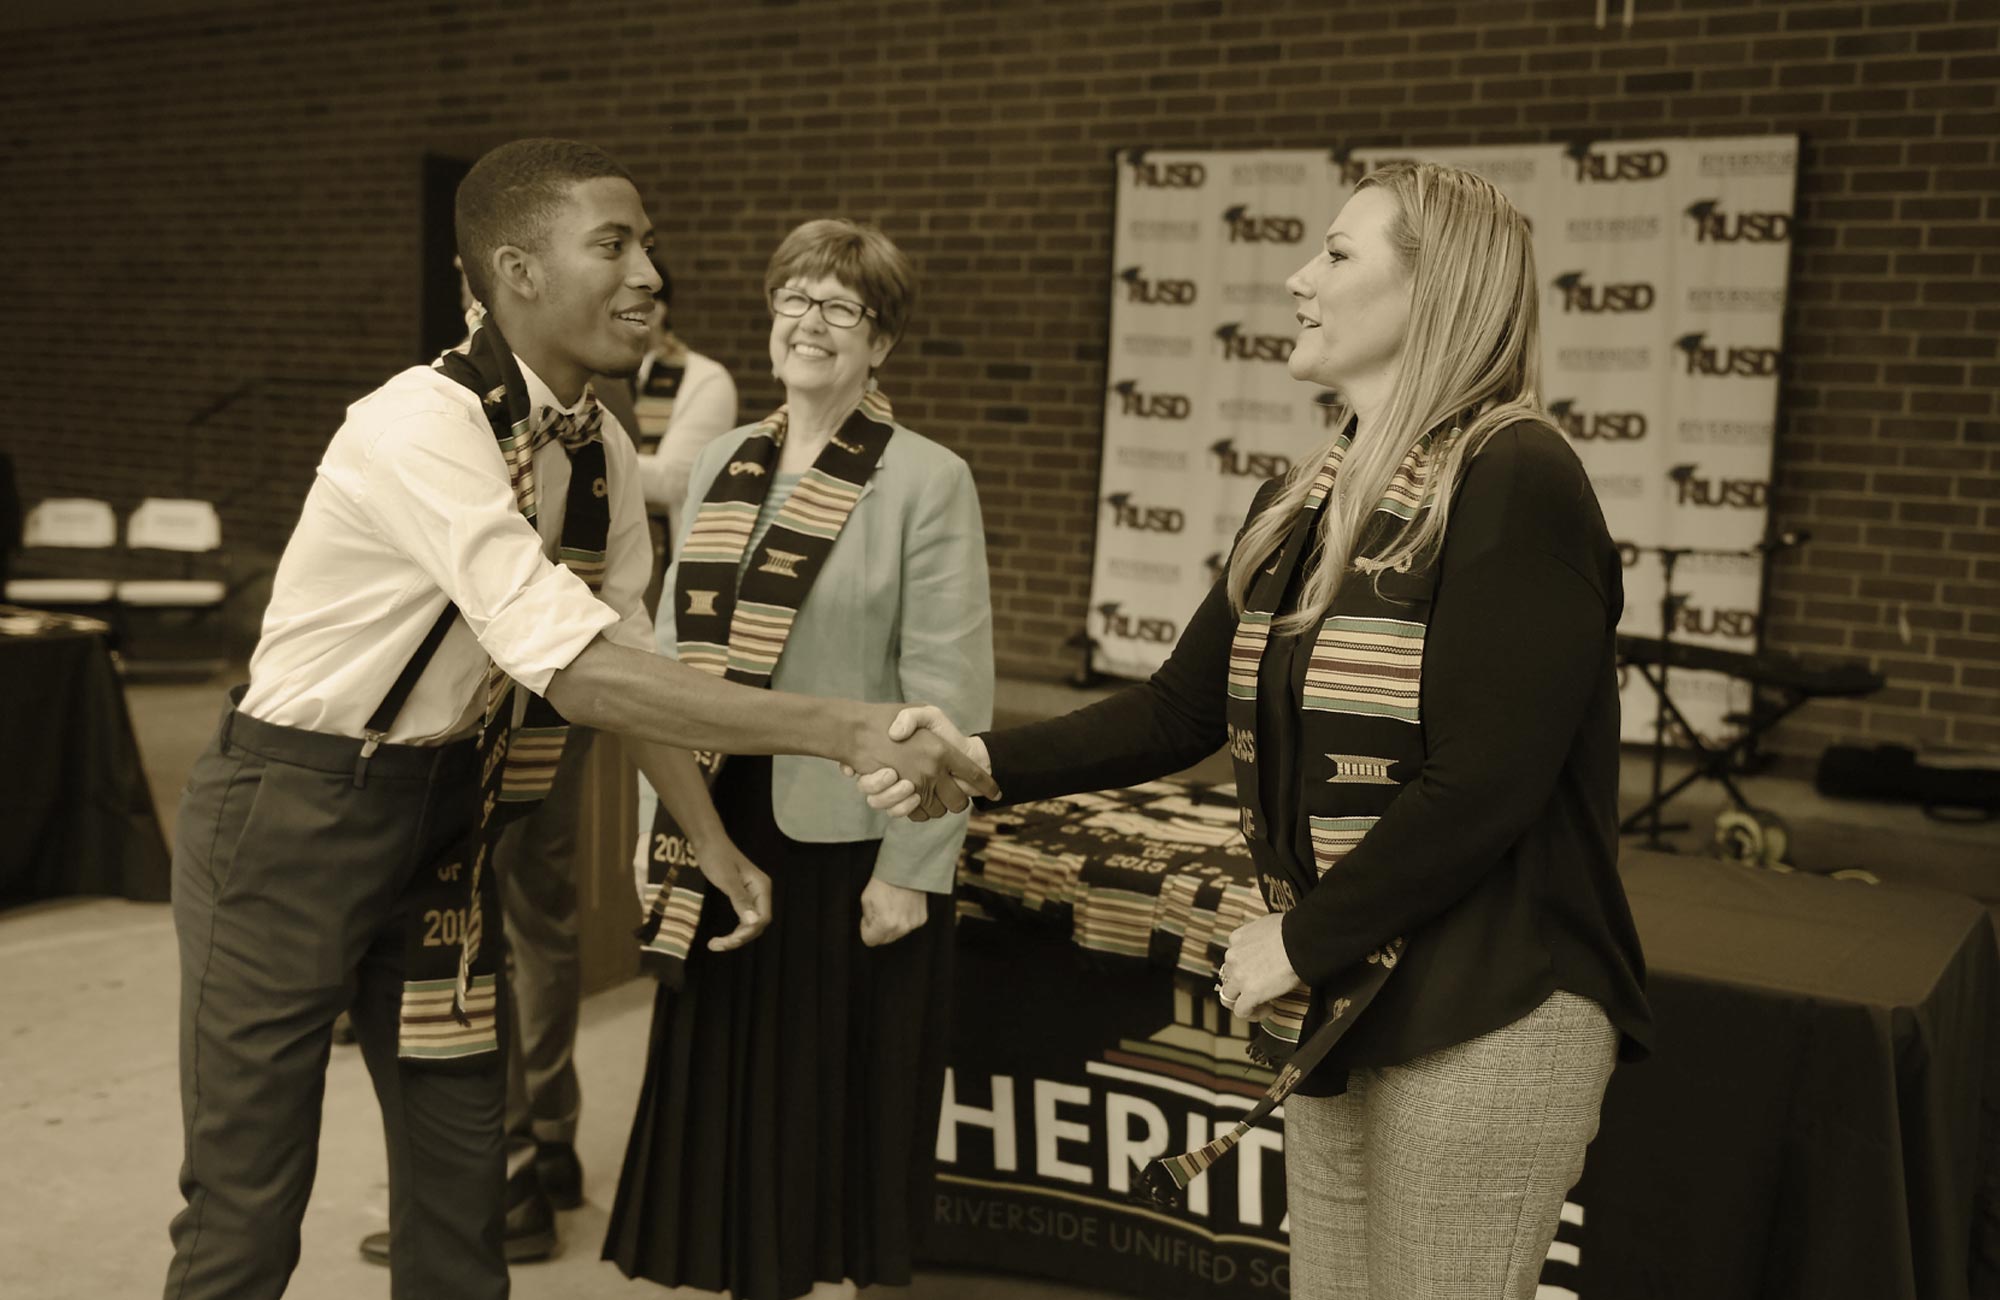 a student and member of faculty shake hands at an event